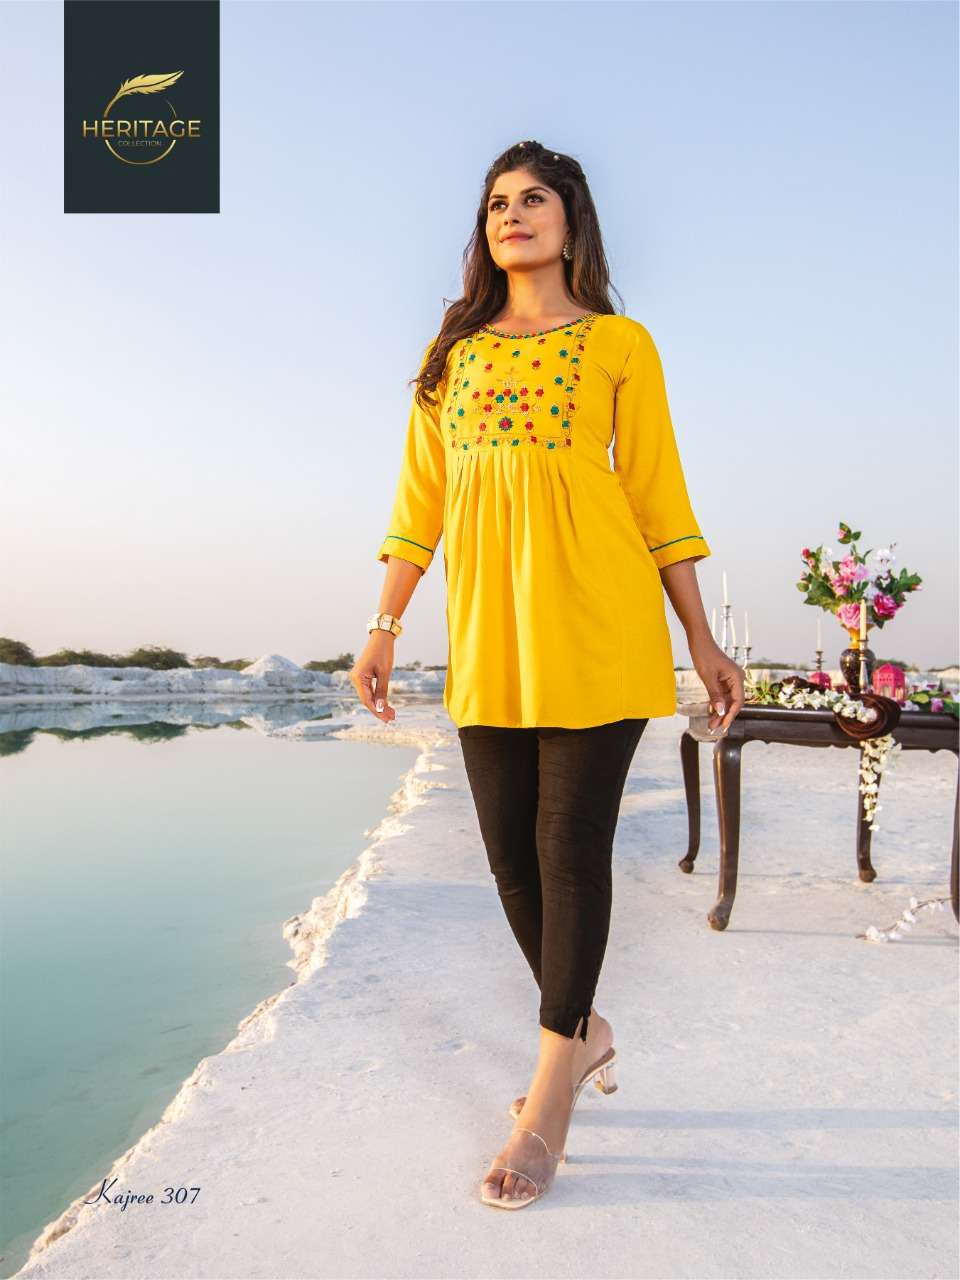 HERITAGE COLLECTION PRESENTS DESIGNER TUNICS WITH CONCEPT EMBROIDERY